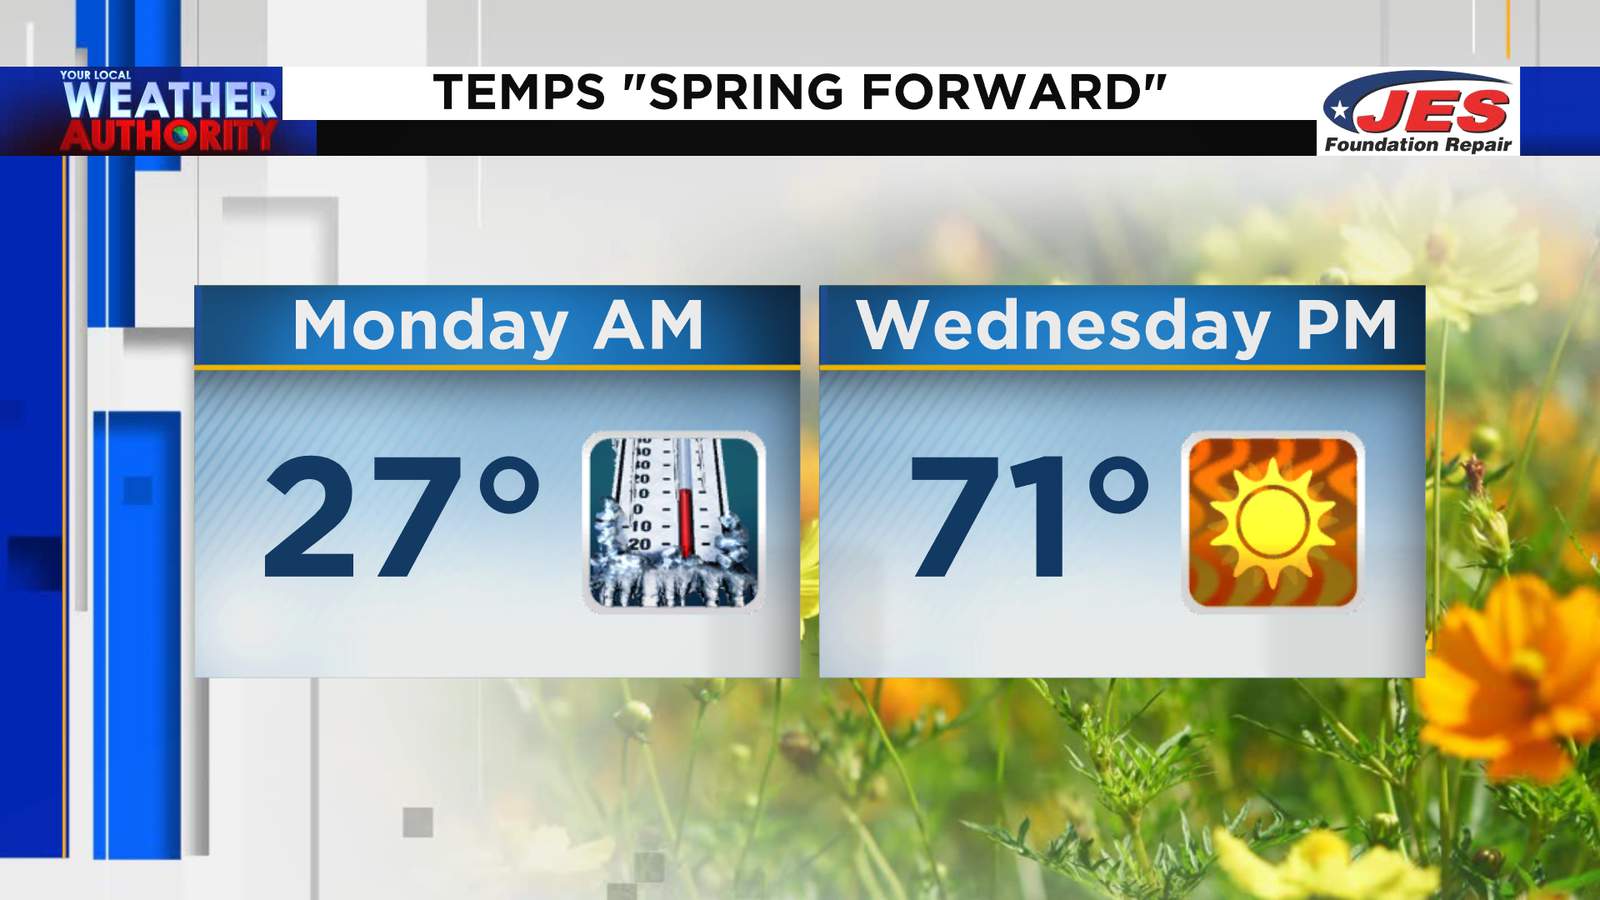 Temperatures “spring forward” throughout much of the week